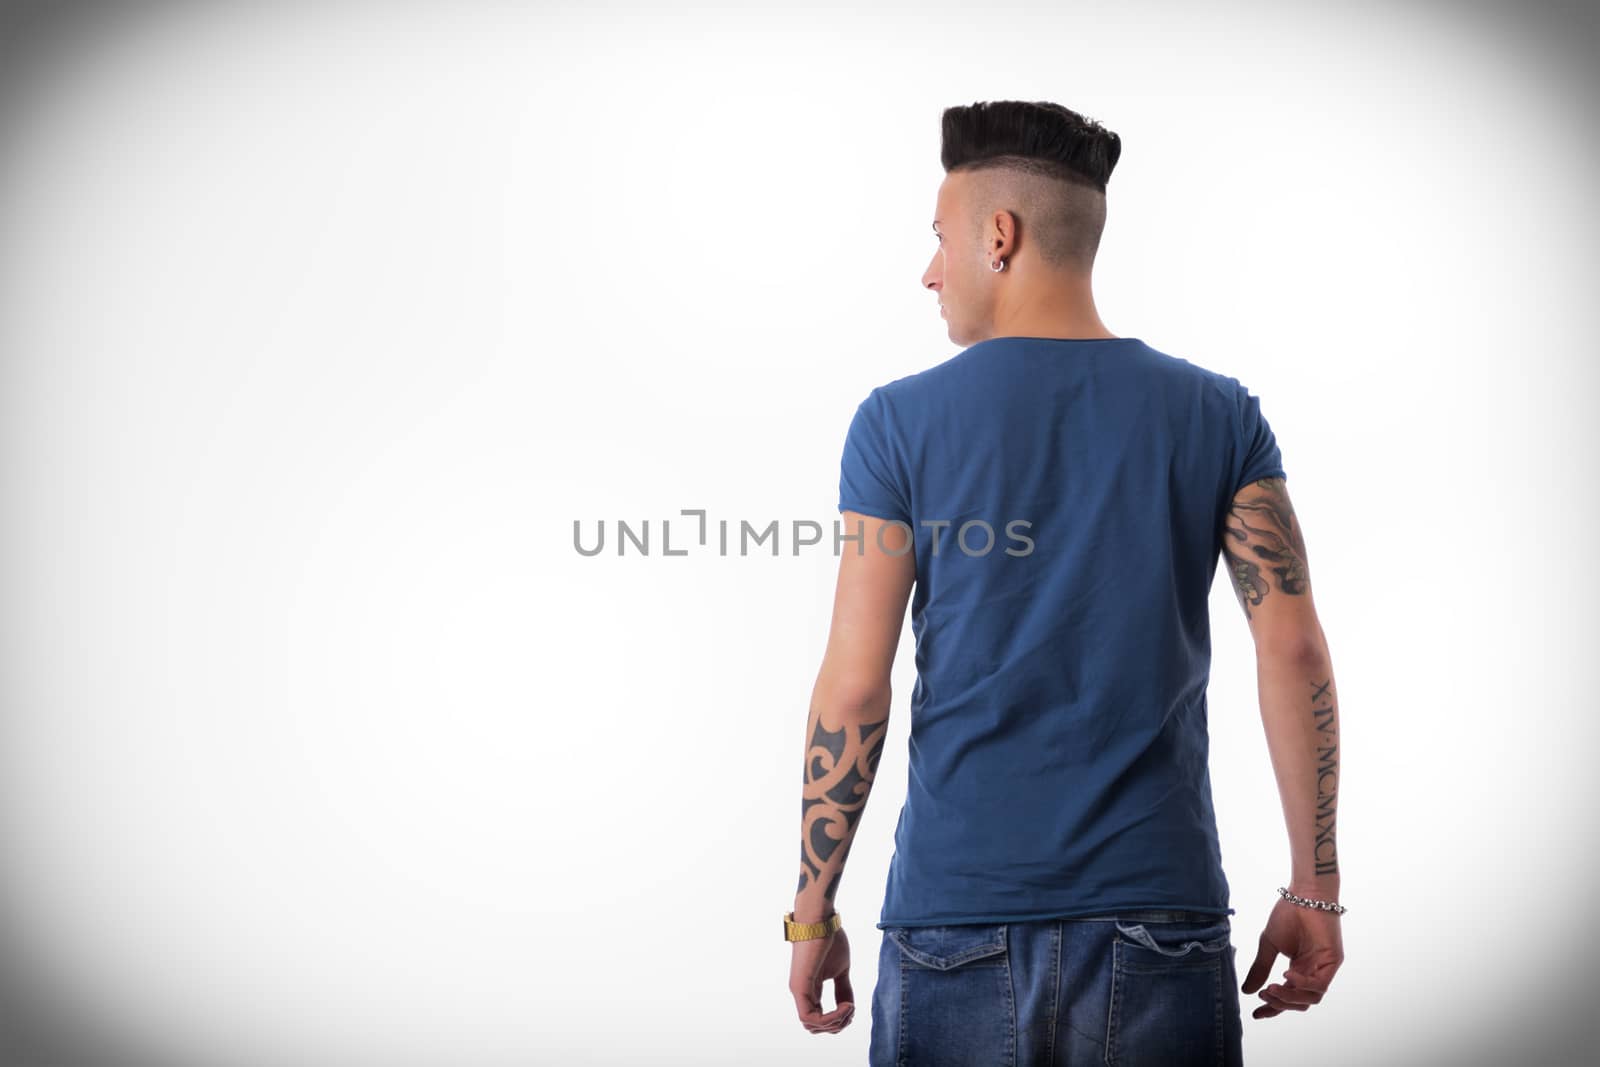 Back of trendy young man looking to a side at empty copy space, wearing blue t-shirt and jeans